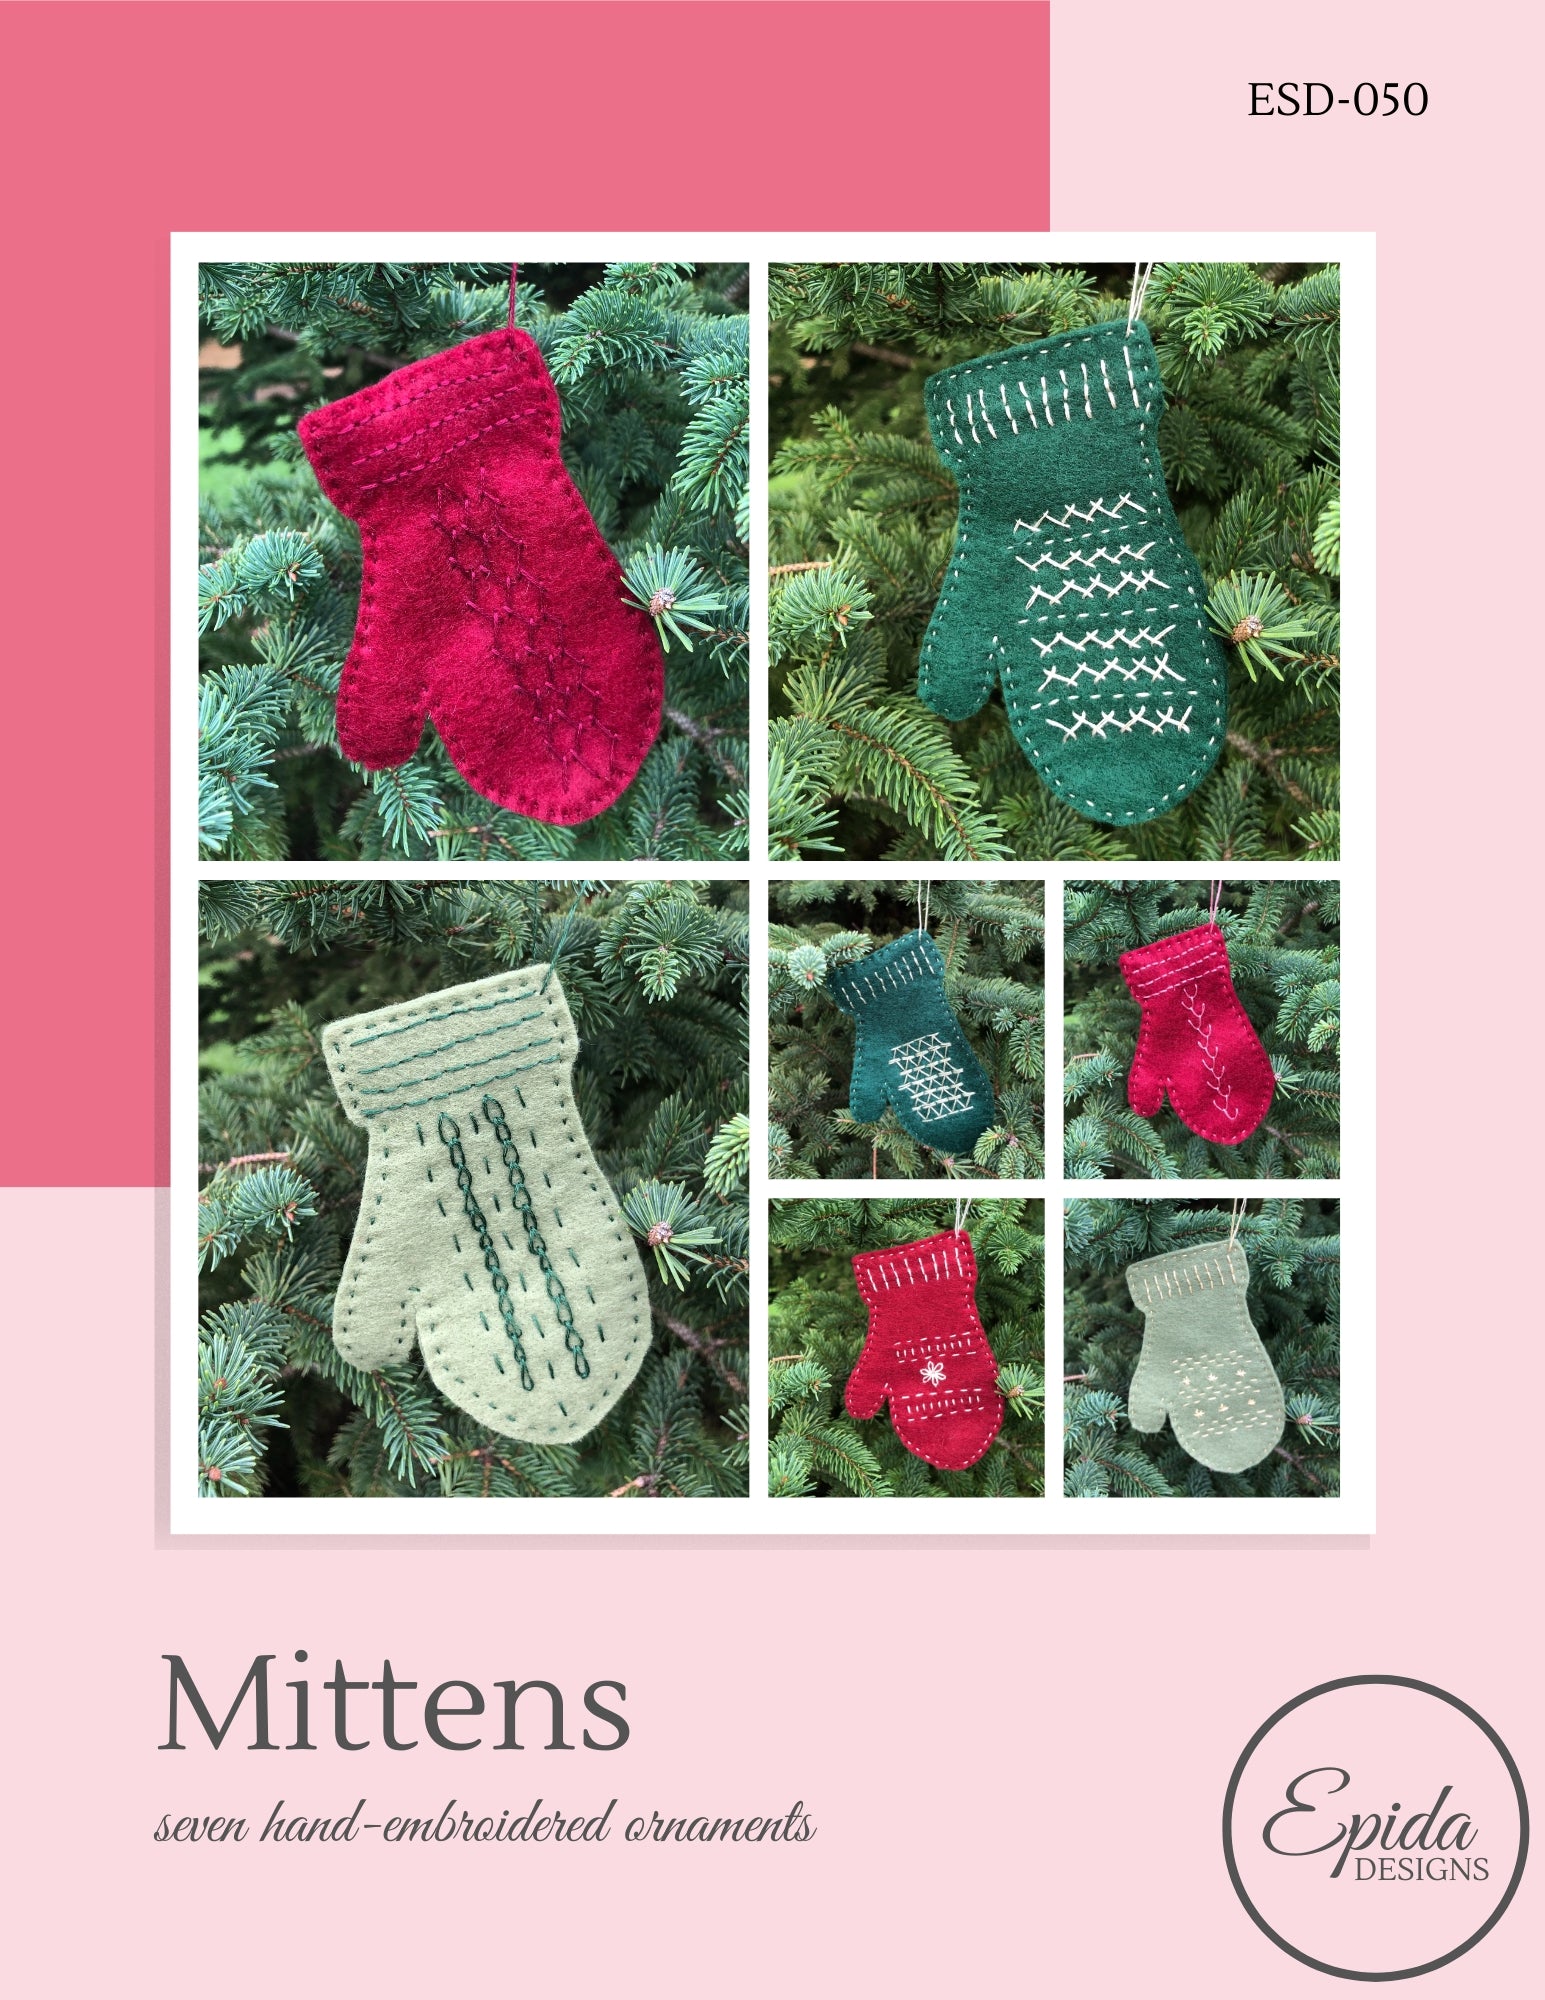 cover for embroidered mittens ornaments.